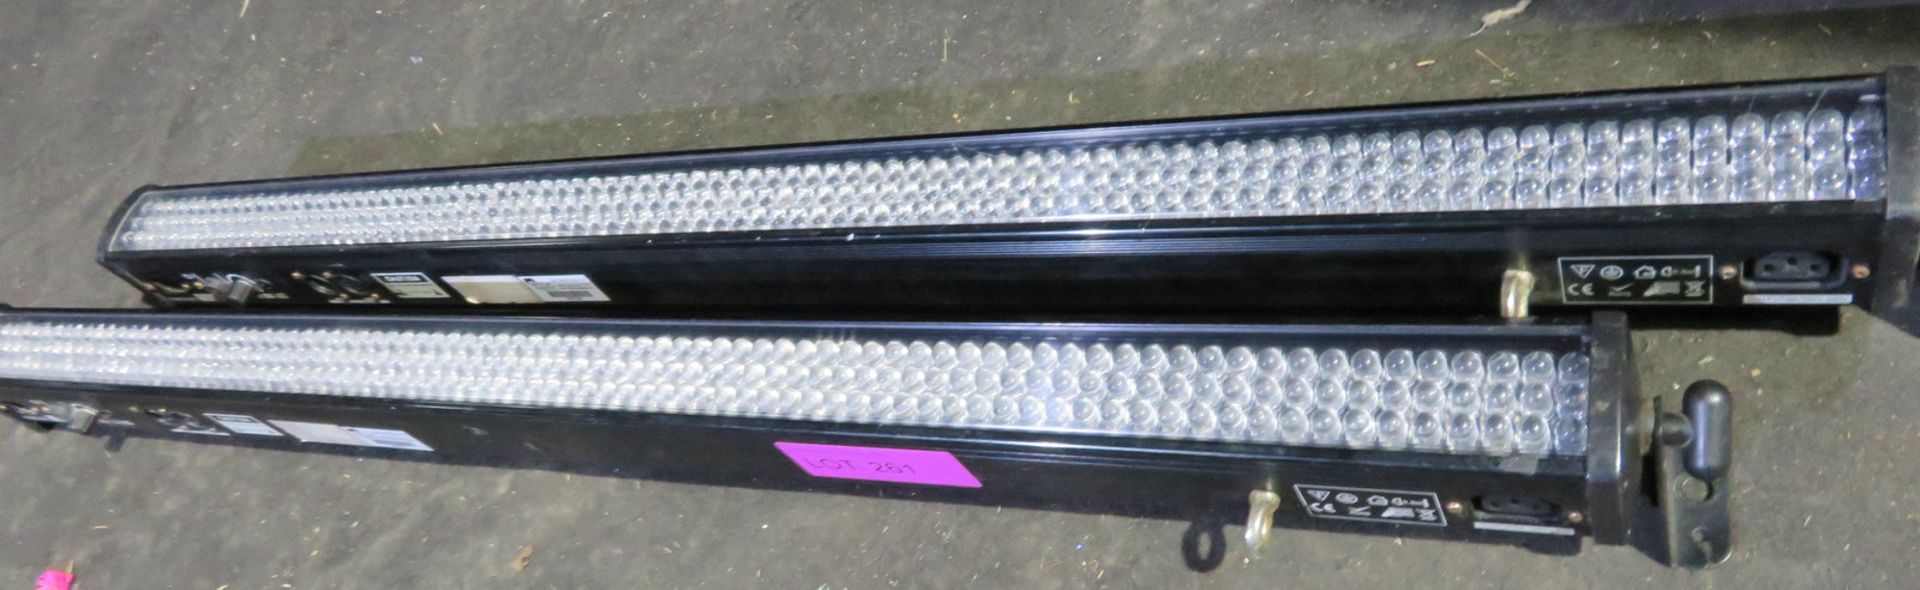 2x DMX LED batten. All working - Image 2 of 7